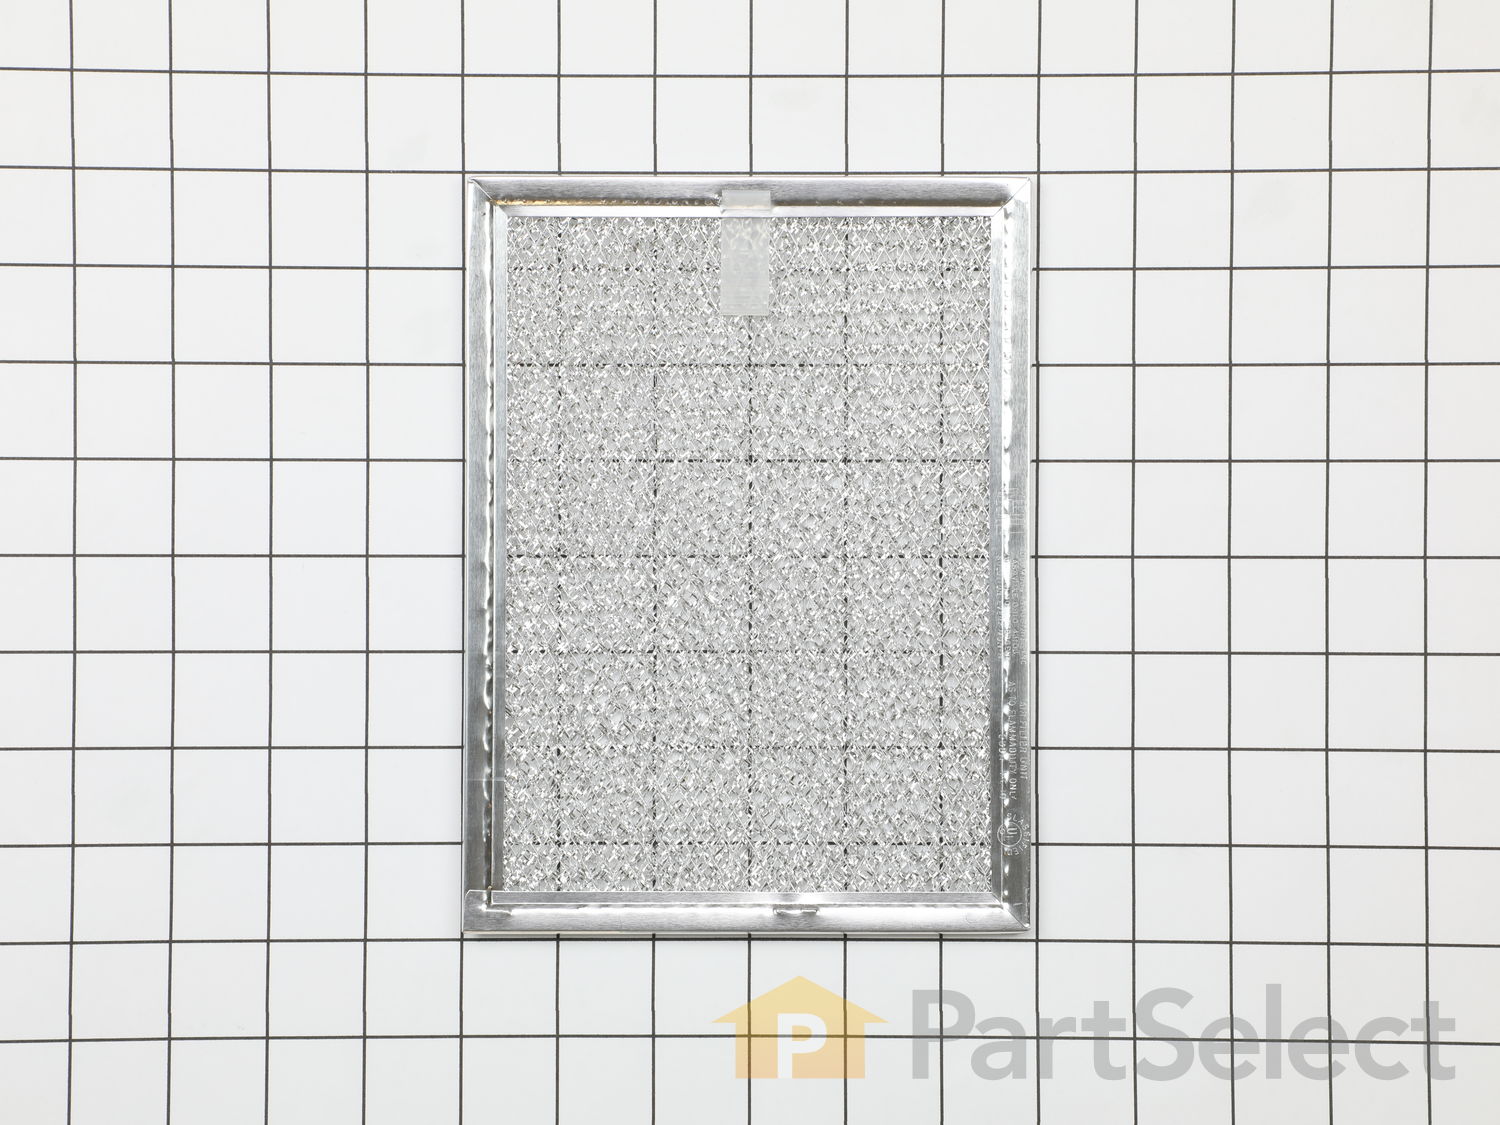 2 Vent hood microwave filter for Frigidaire CFMV156DSD FREE Shipping to USA OEM